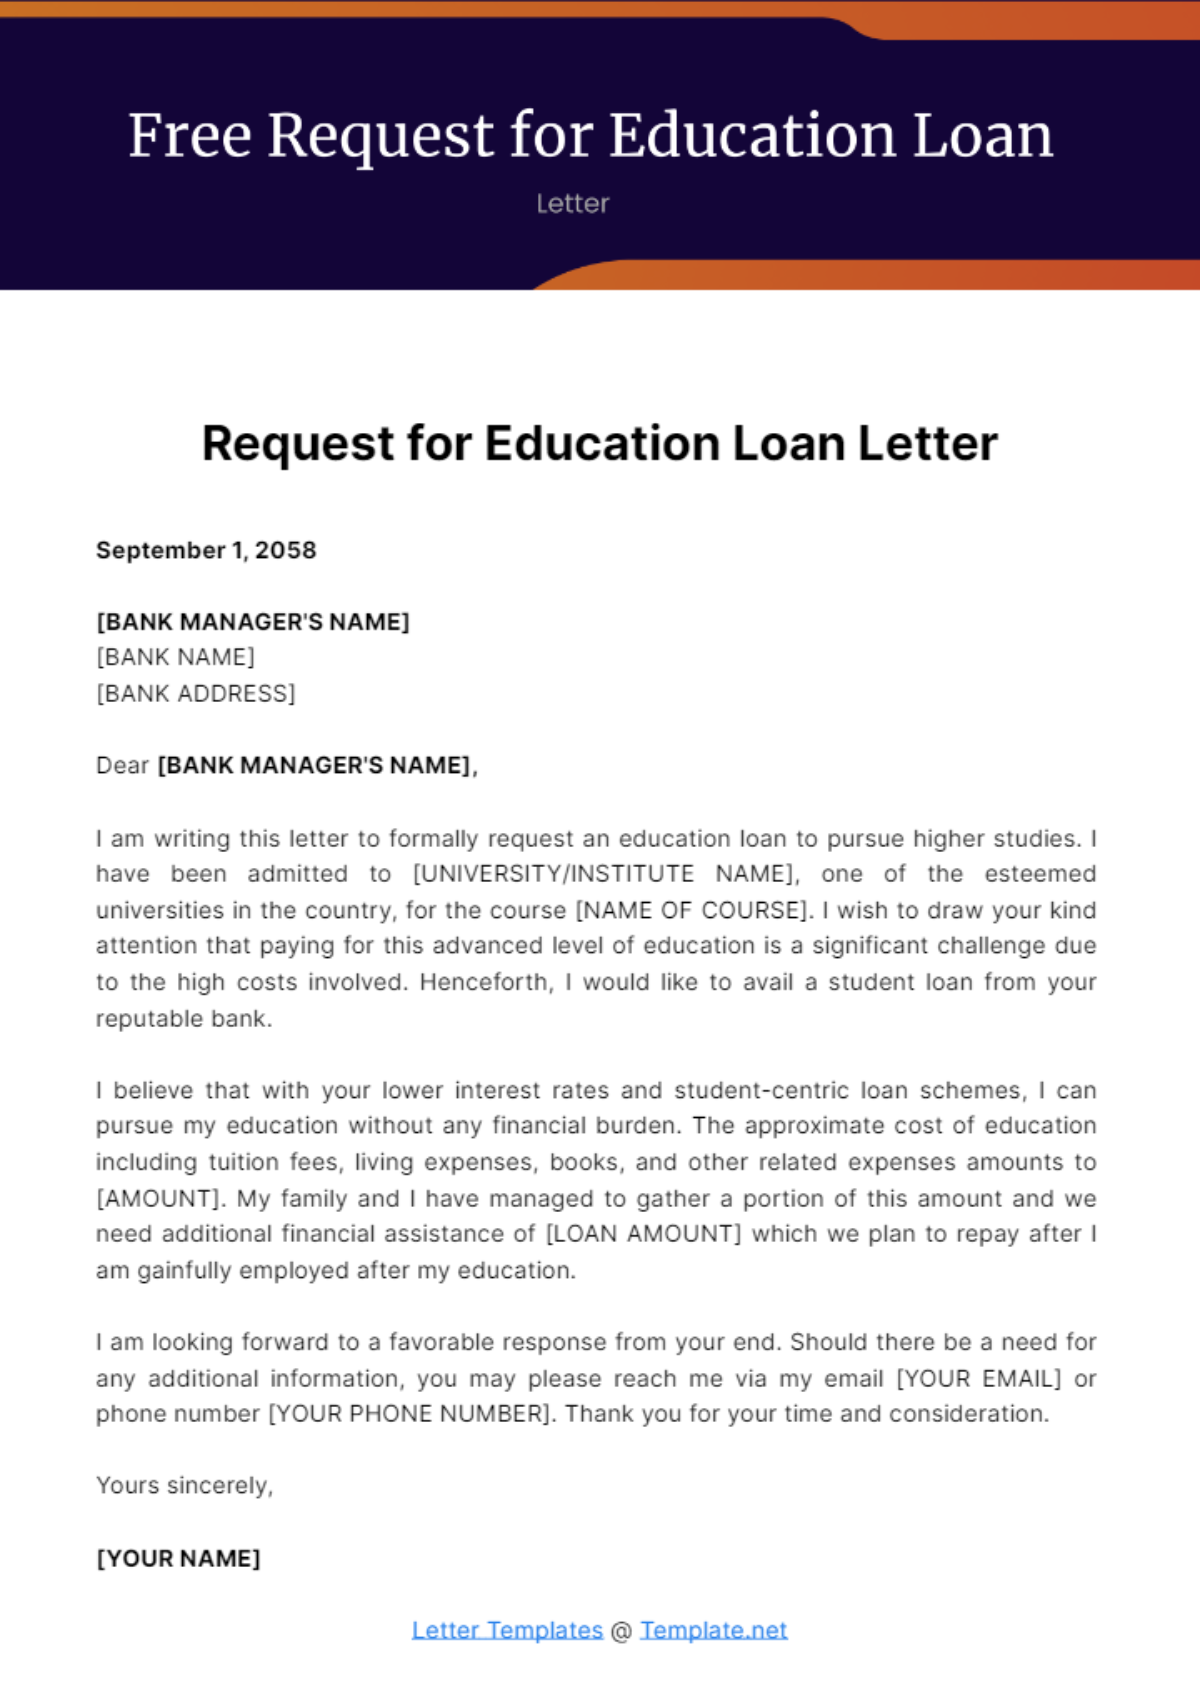 Free Request for Education Loan Letter Template